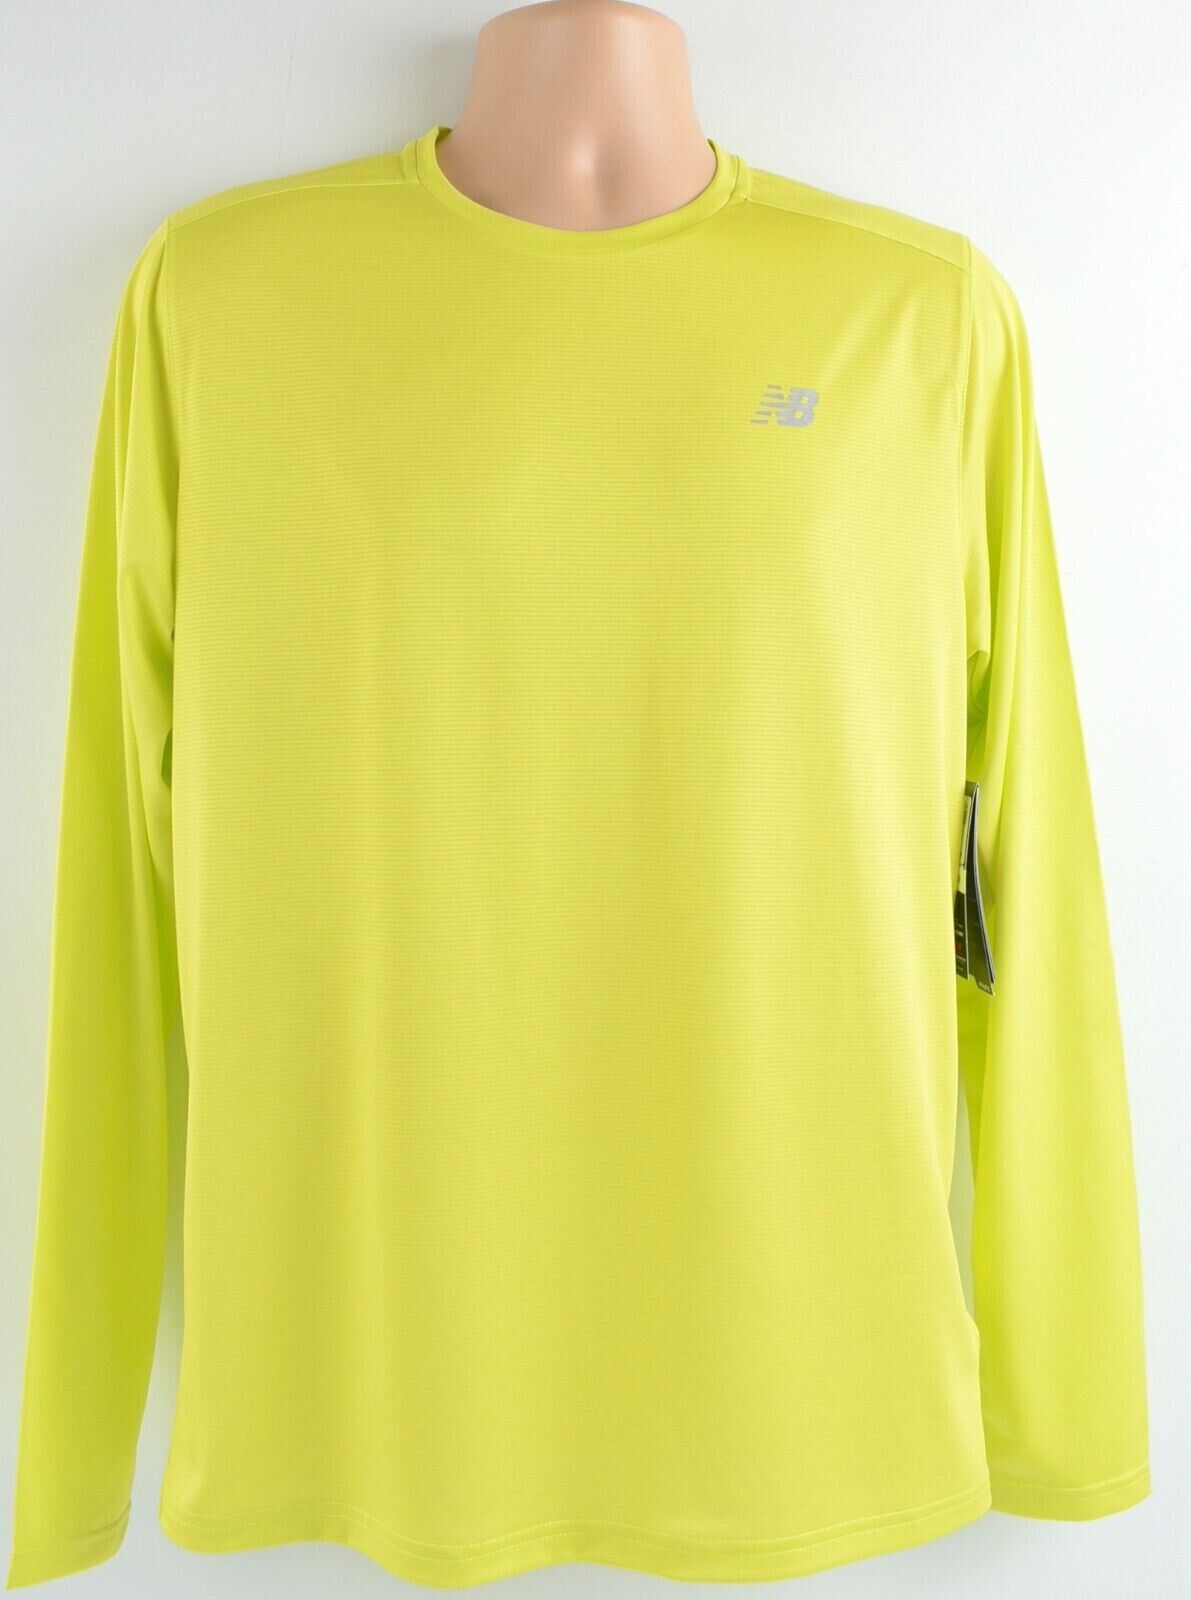 NEW BALANCE Men's ACCELERATE Long Sleeve Running Top, Neon Yellow, size SMALL